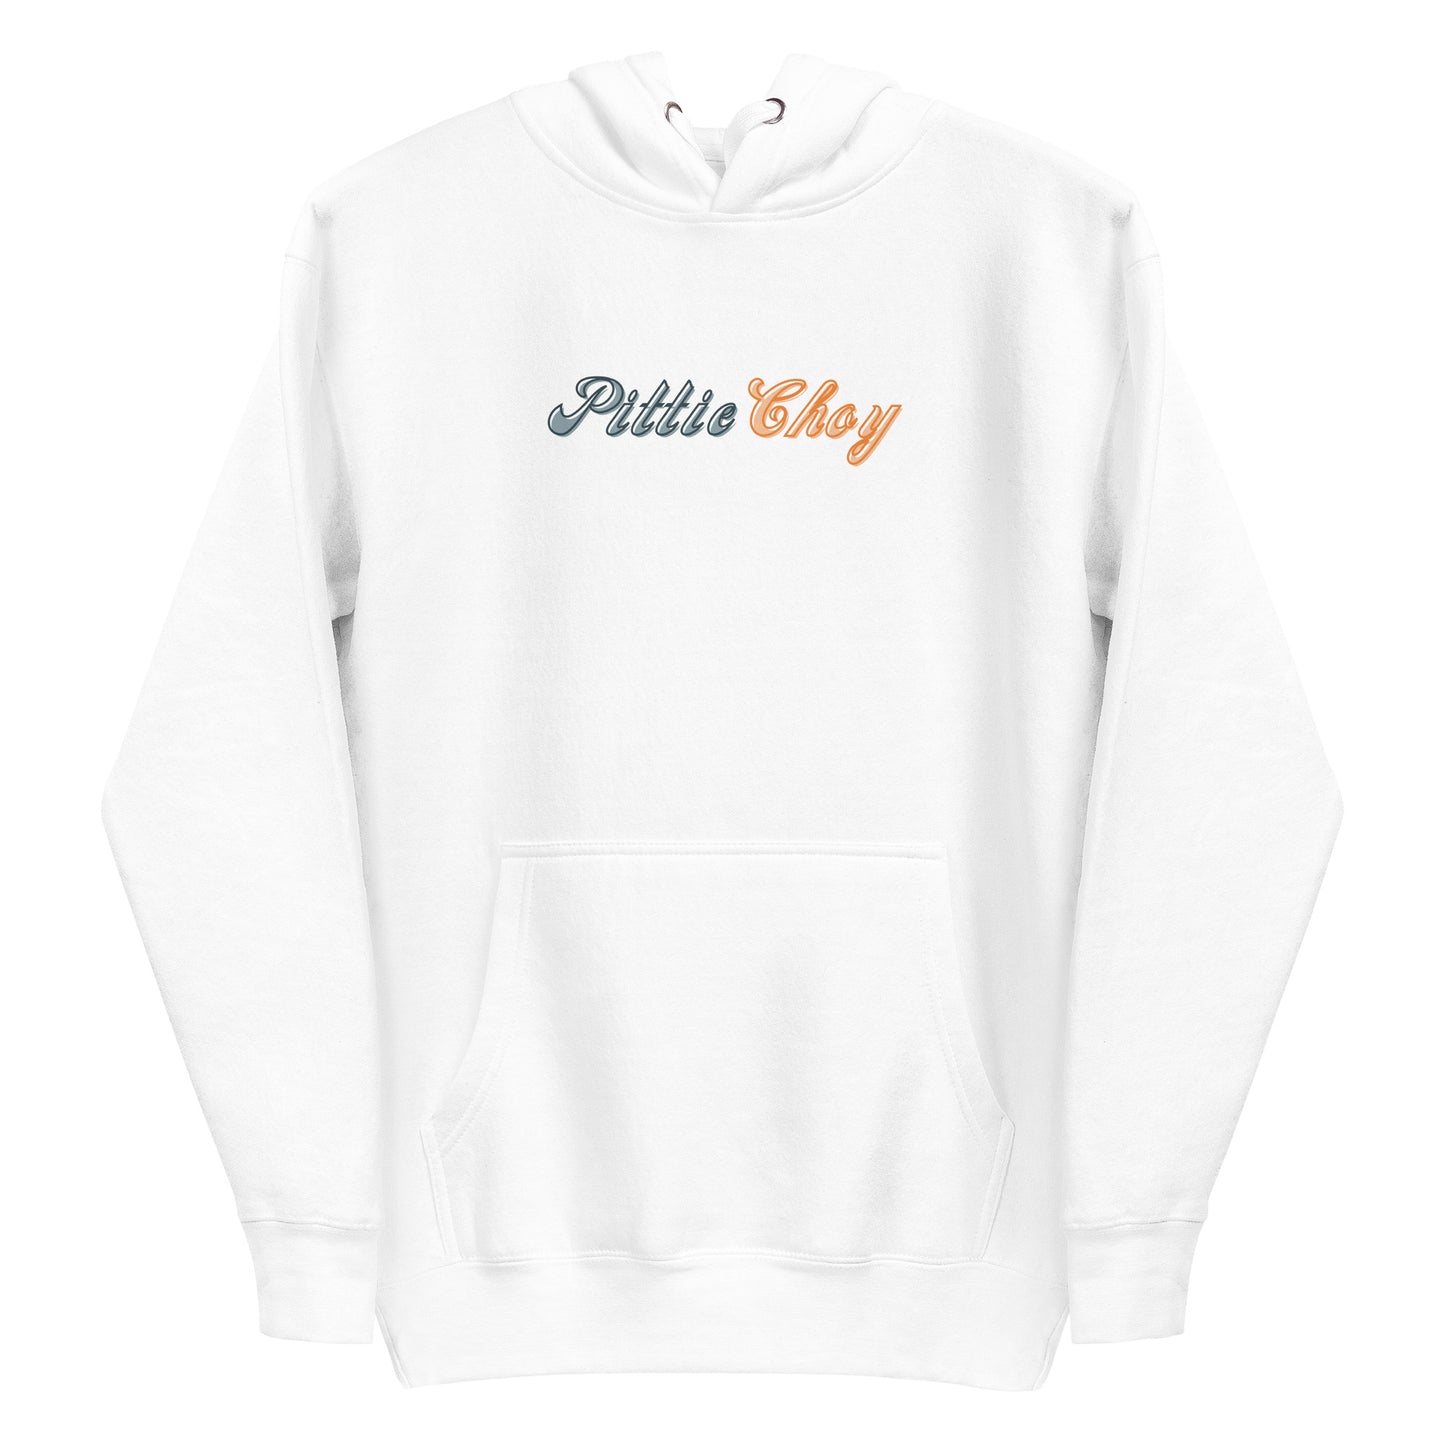 Proud Pitbull Dad Hoodie - Wear Your Love for Your Pup! - Pittie Choy